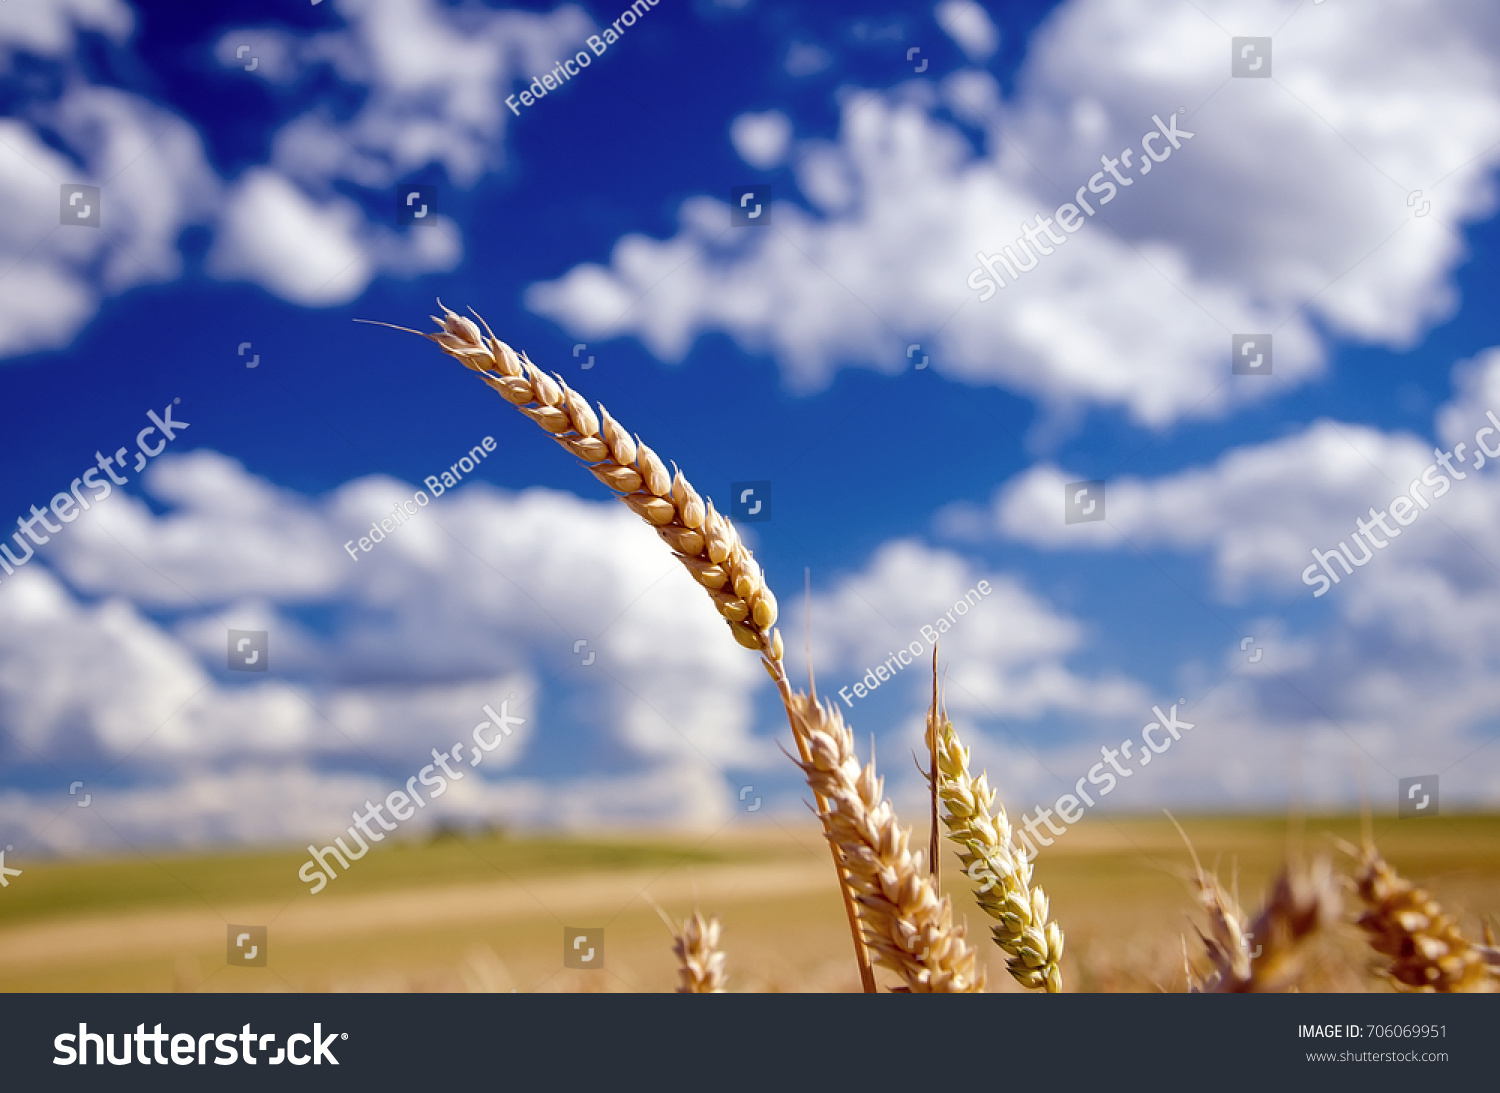 stock-photo-close-up-shot-of-wheat-ears-